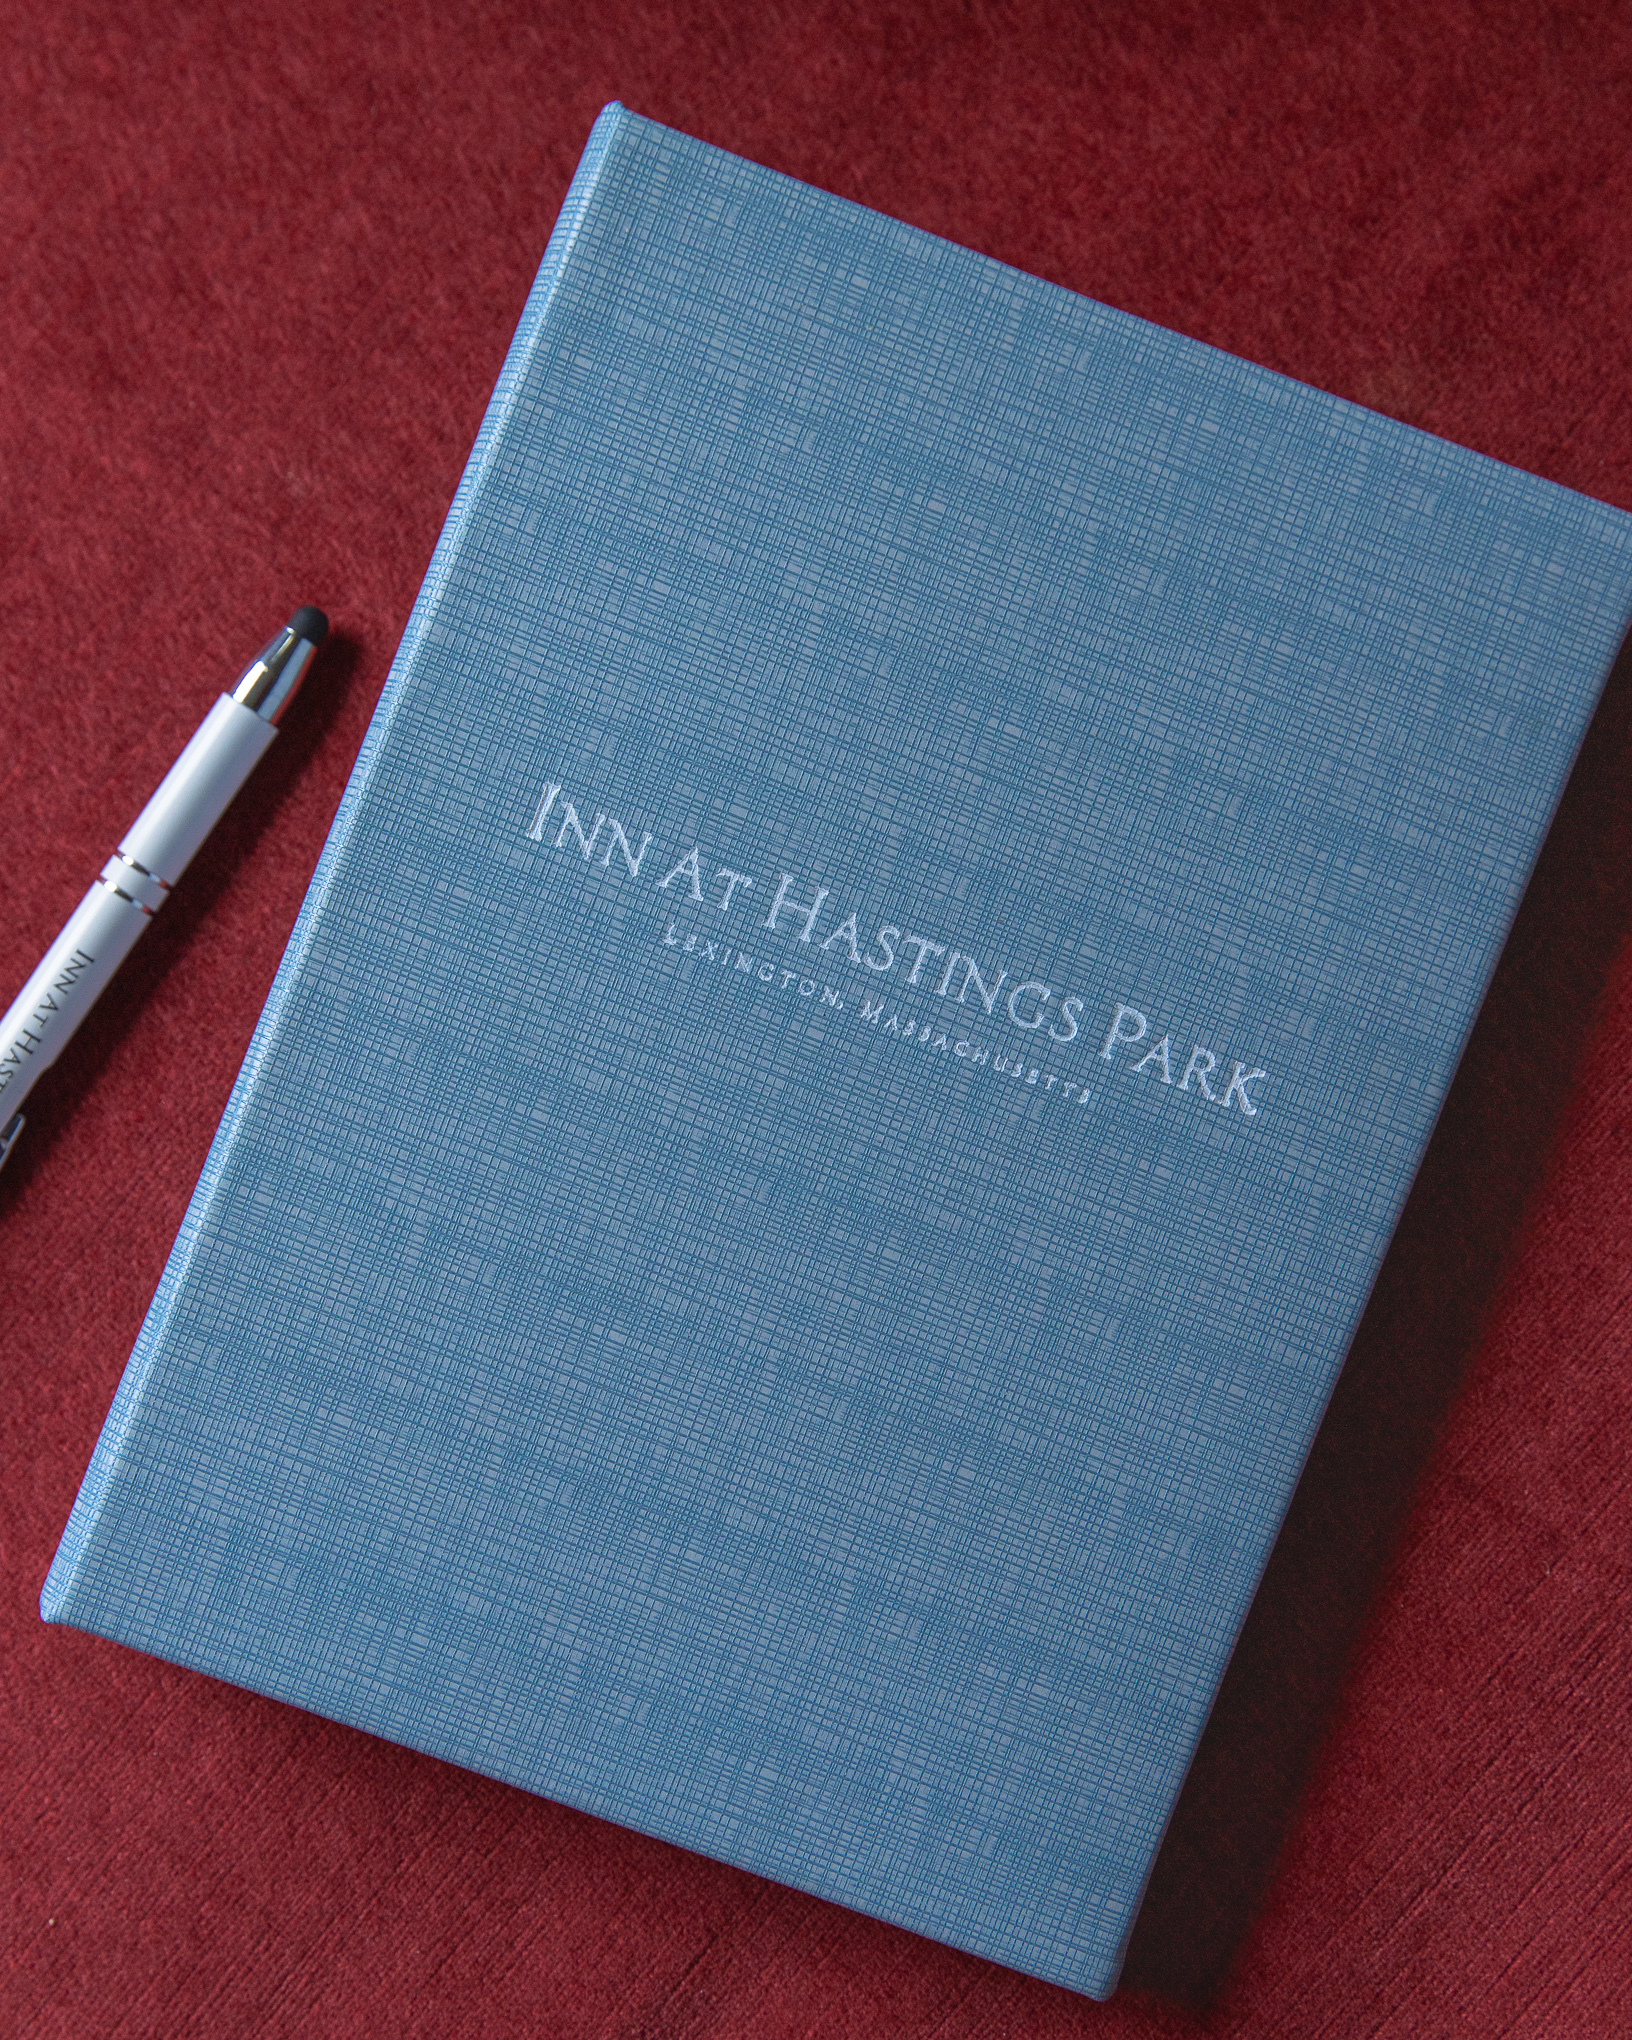 In-room dining book and pen